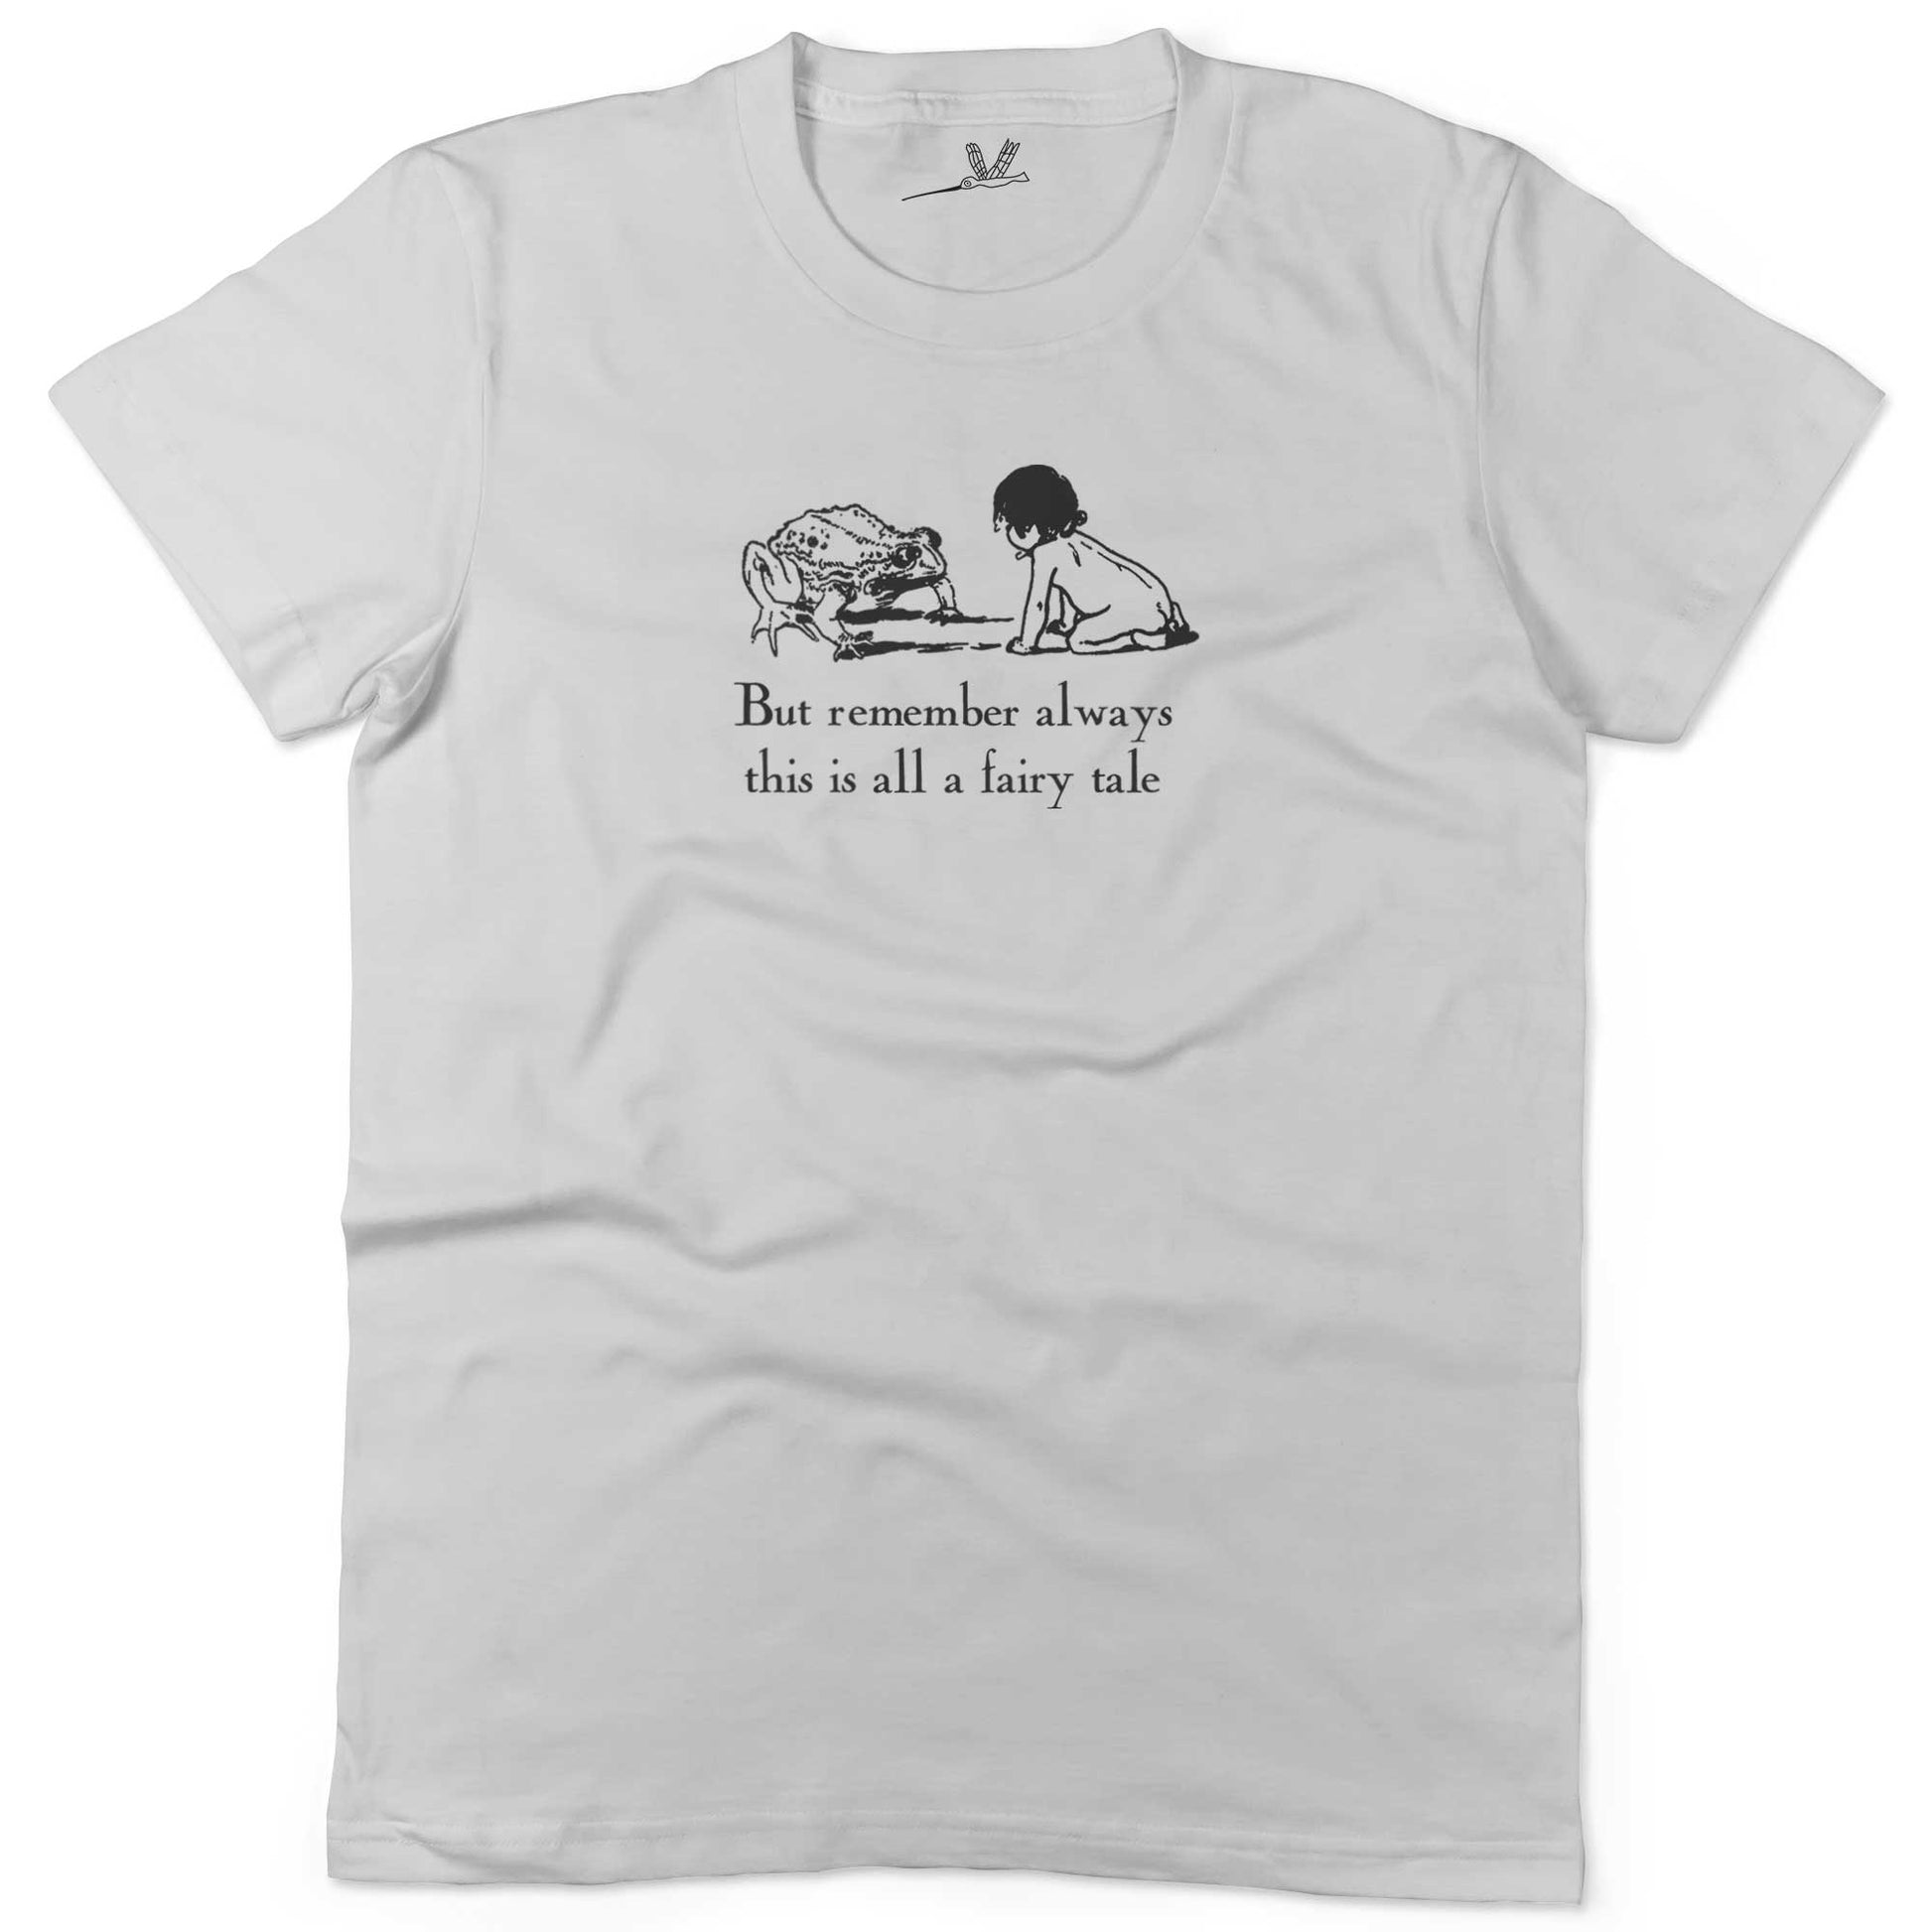 But remember always this is all a fairy tale Unisex Or Women's Cotton T-shirt-White-Woman